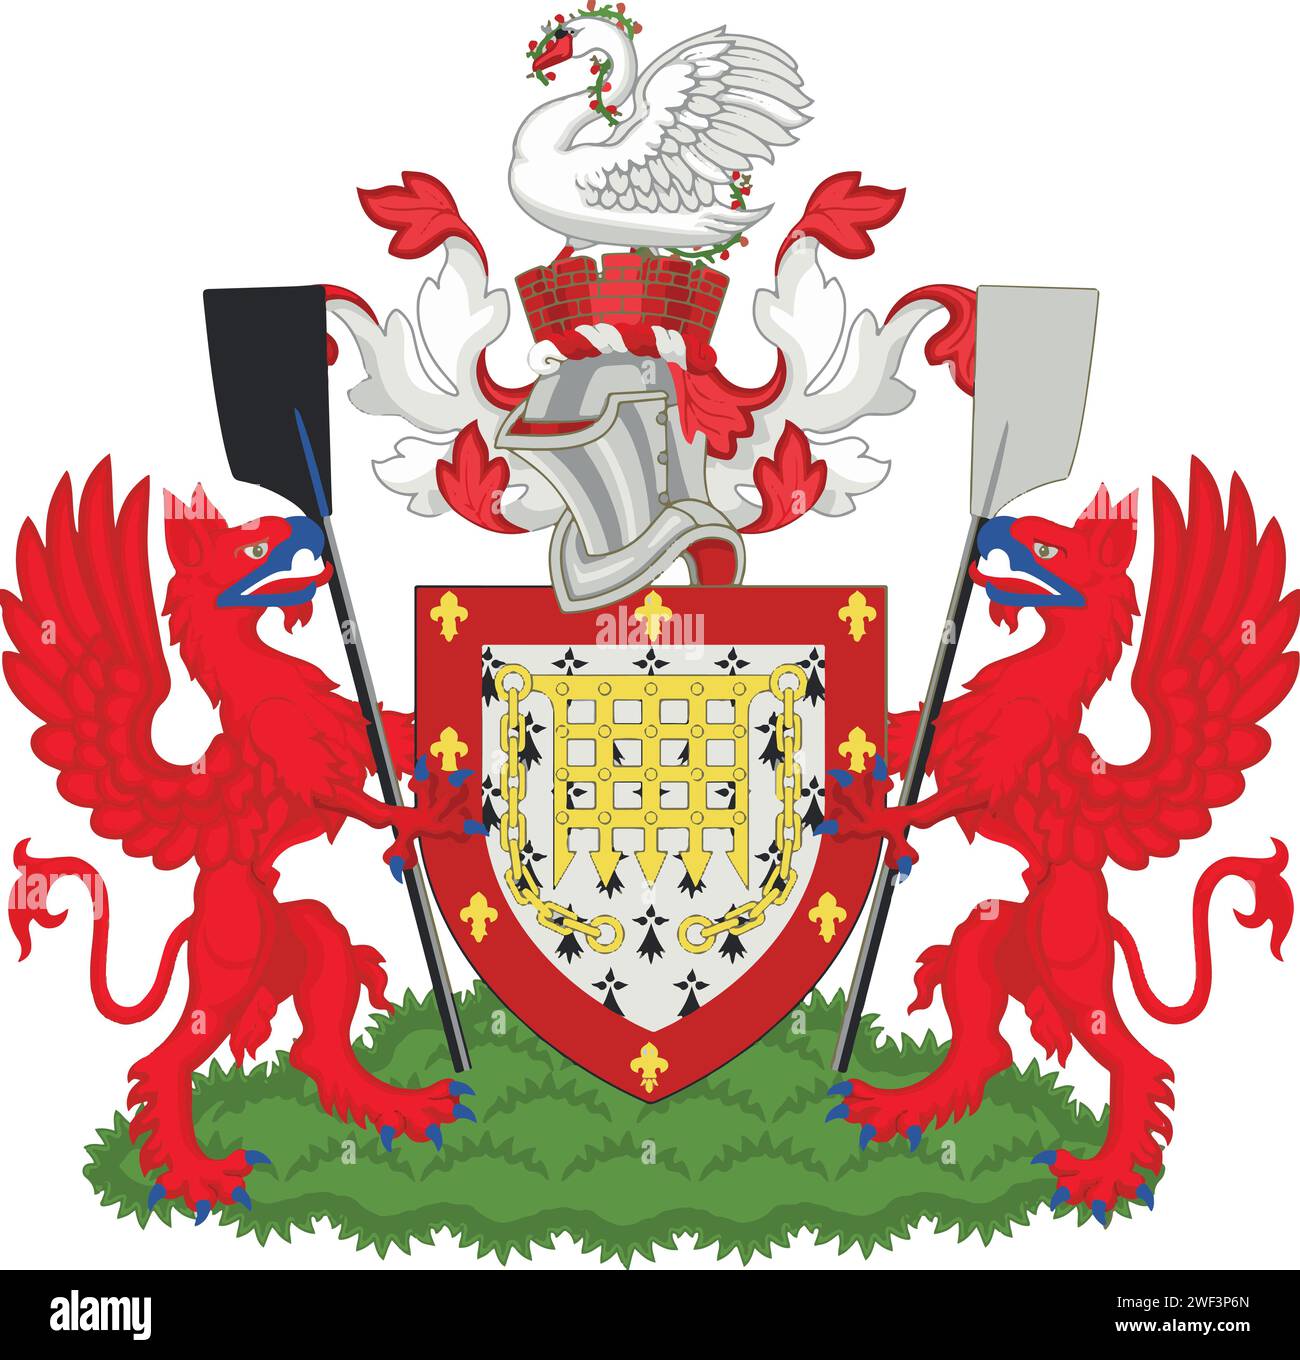 Official coat of arms vector illustration of the English administrative local authority district of the BOROUGH OF RICHMOND UPON THAMES, LONDON Stock Vector